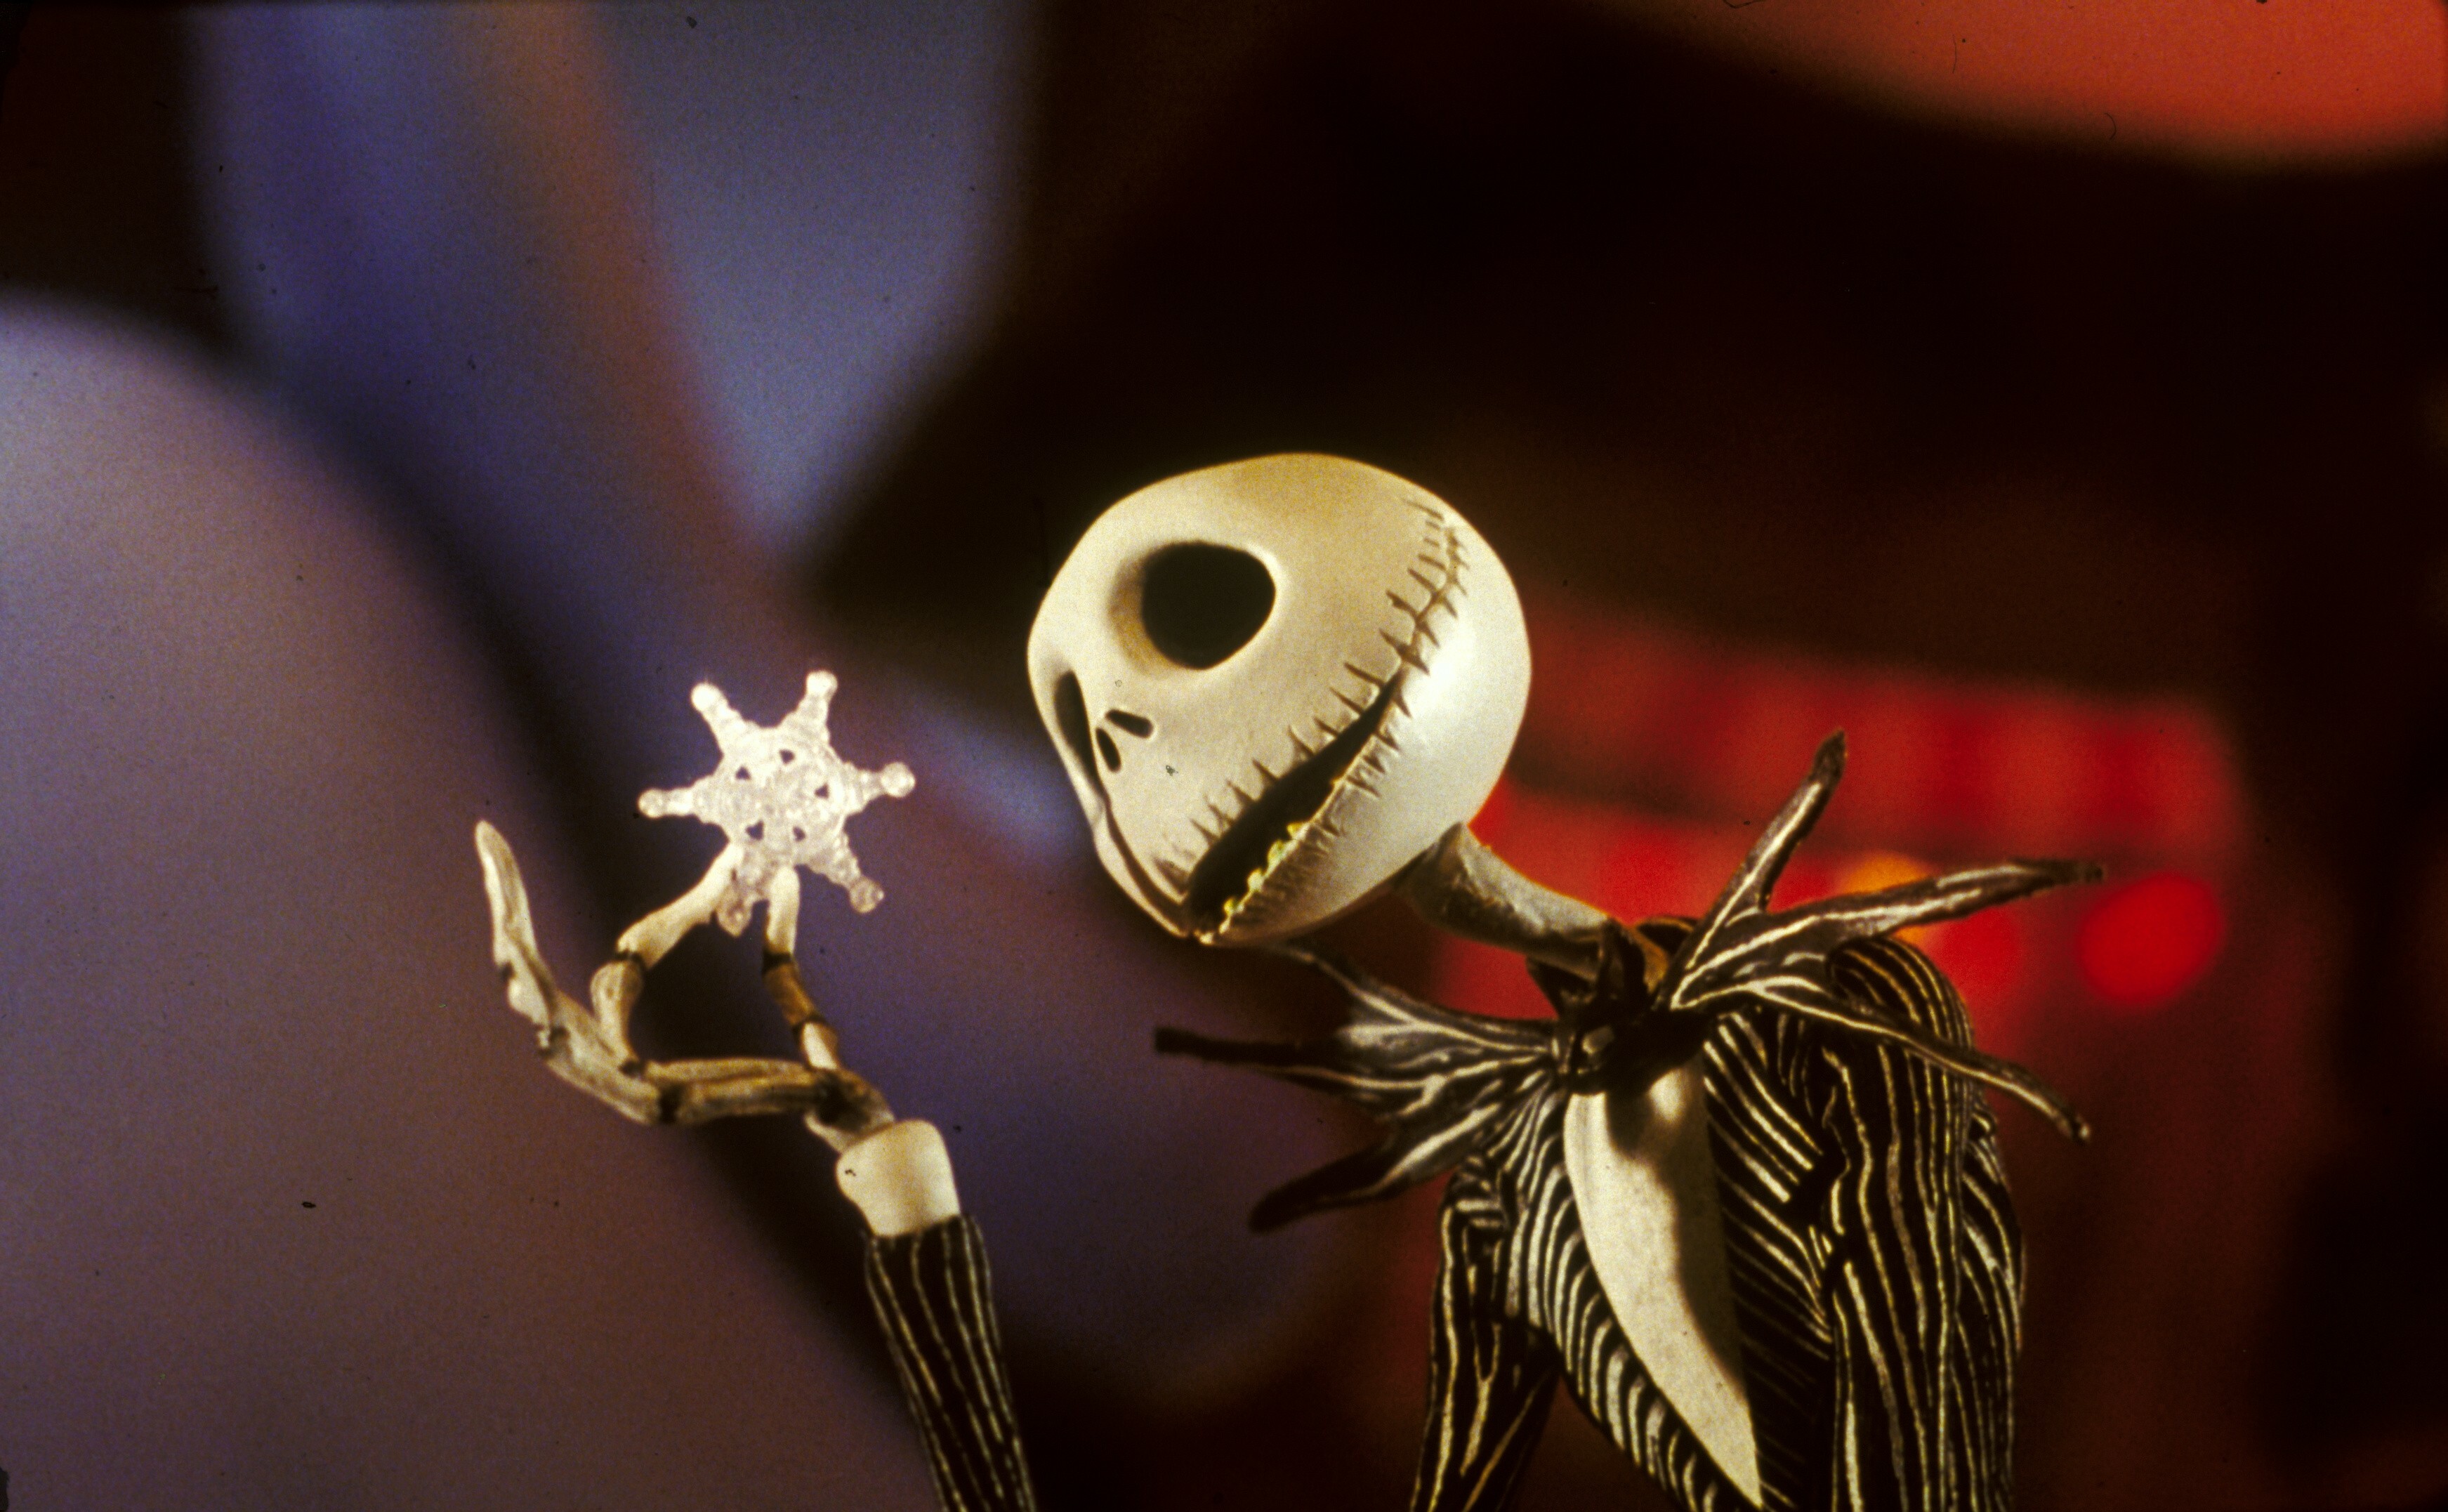 The Nightmare Before Christmas: Jack Skellington, a skeleton known as the "Pumpkin King" of Halloween Town. 3490x2160 HD Background.